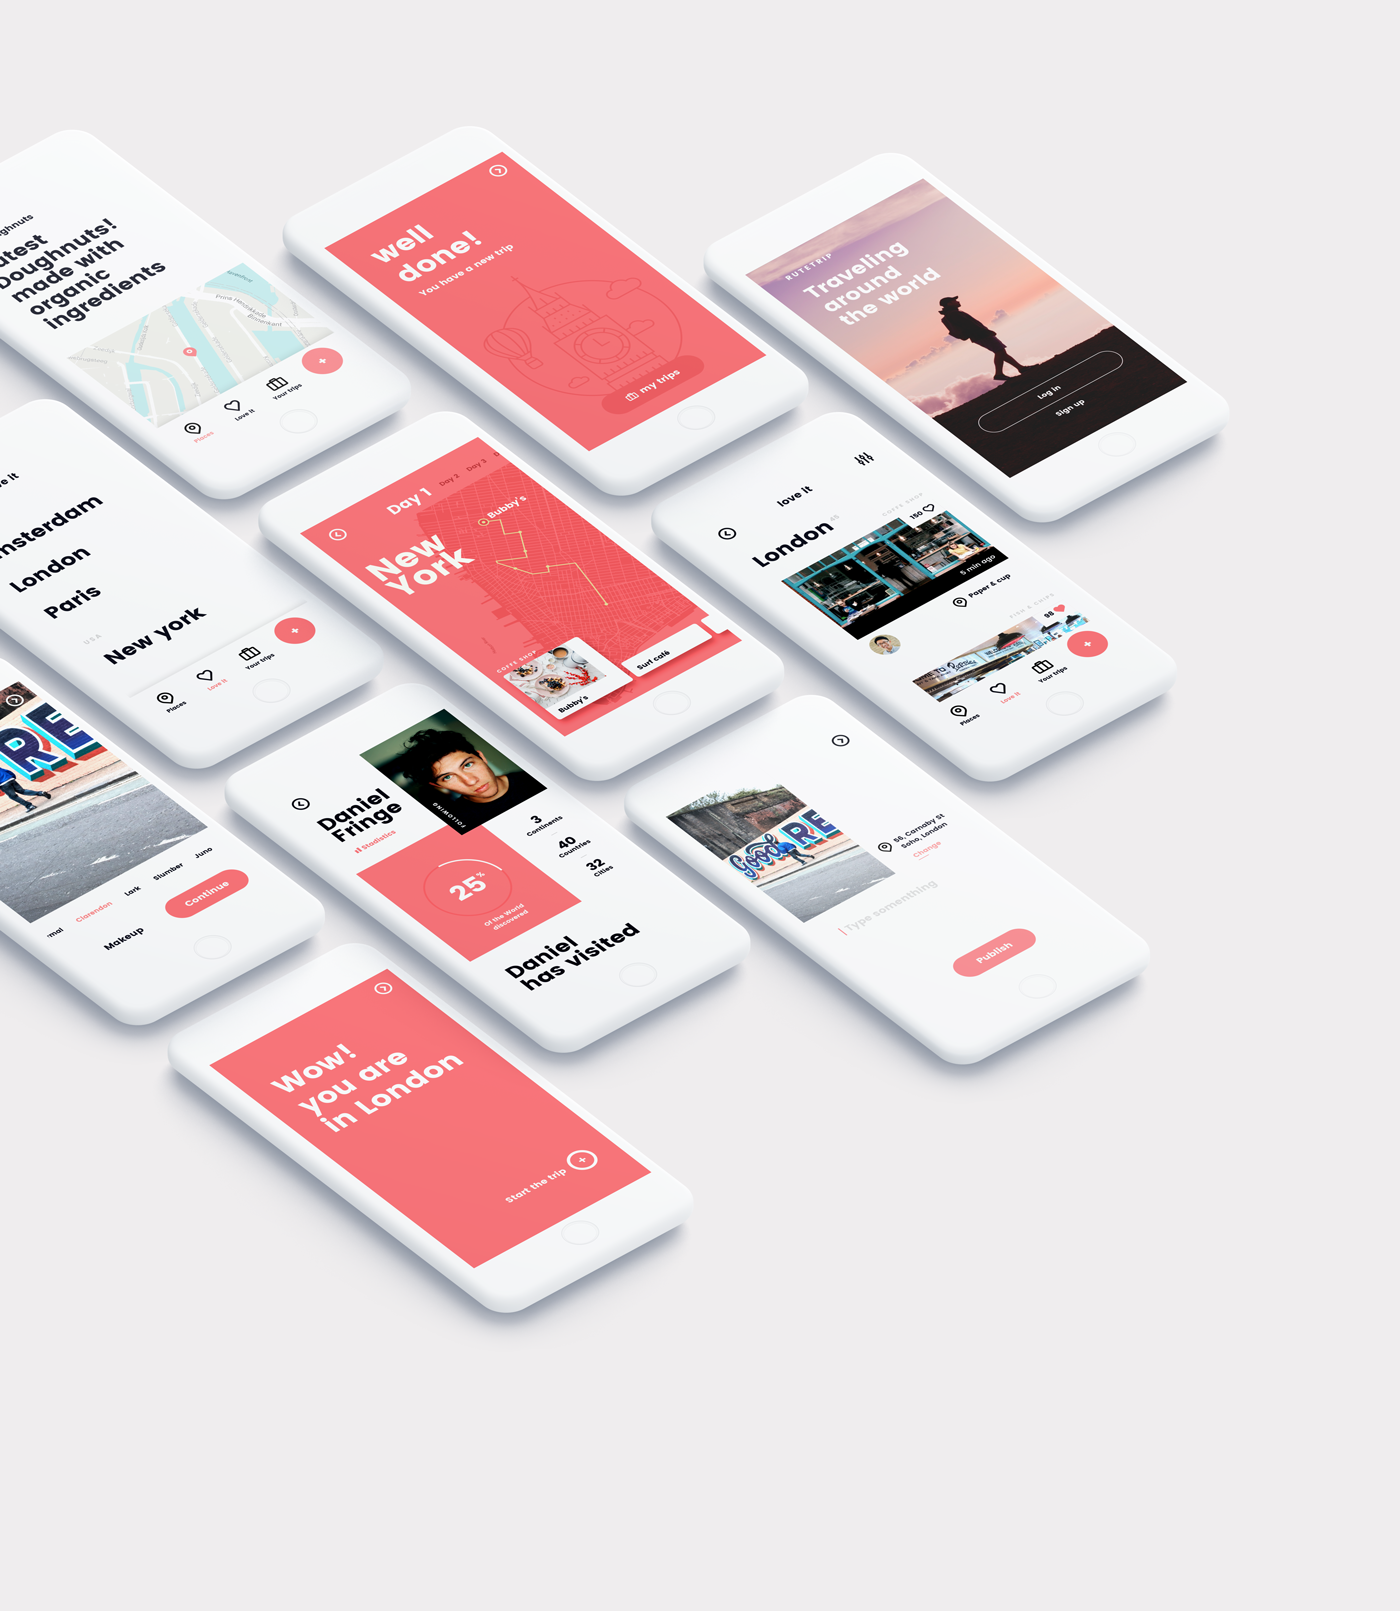 Travel app UI ux mobile interaction user interface user experience